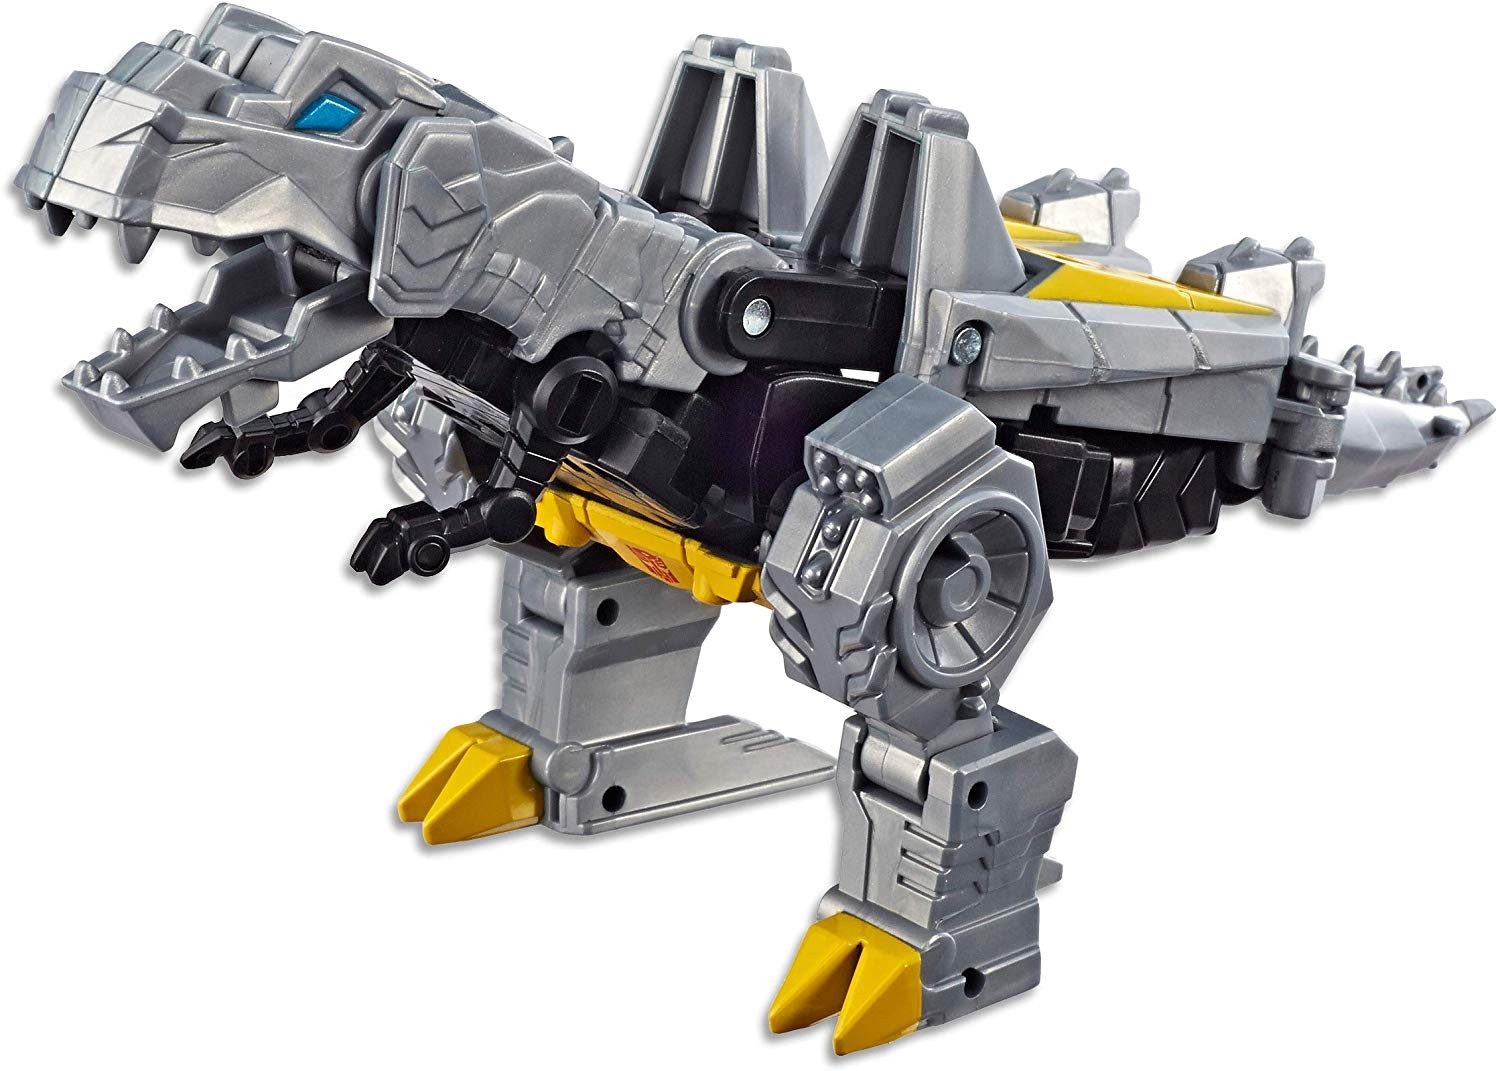 Transformers News: Transformers Cyberverse Power of the Spark Elite Spark Armour Grimlock Available on Amazon